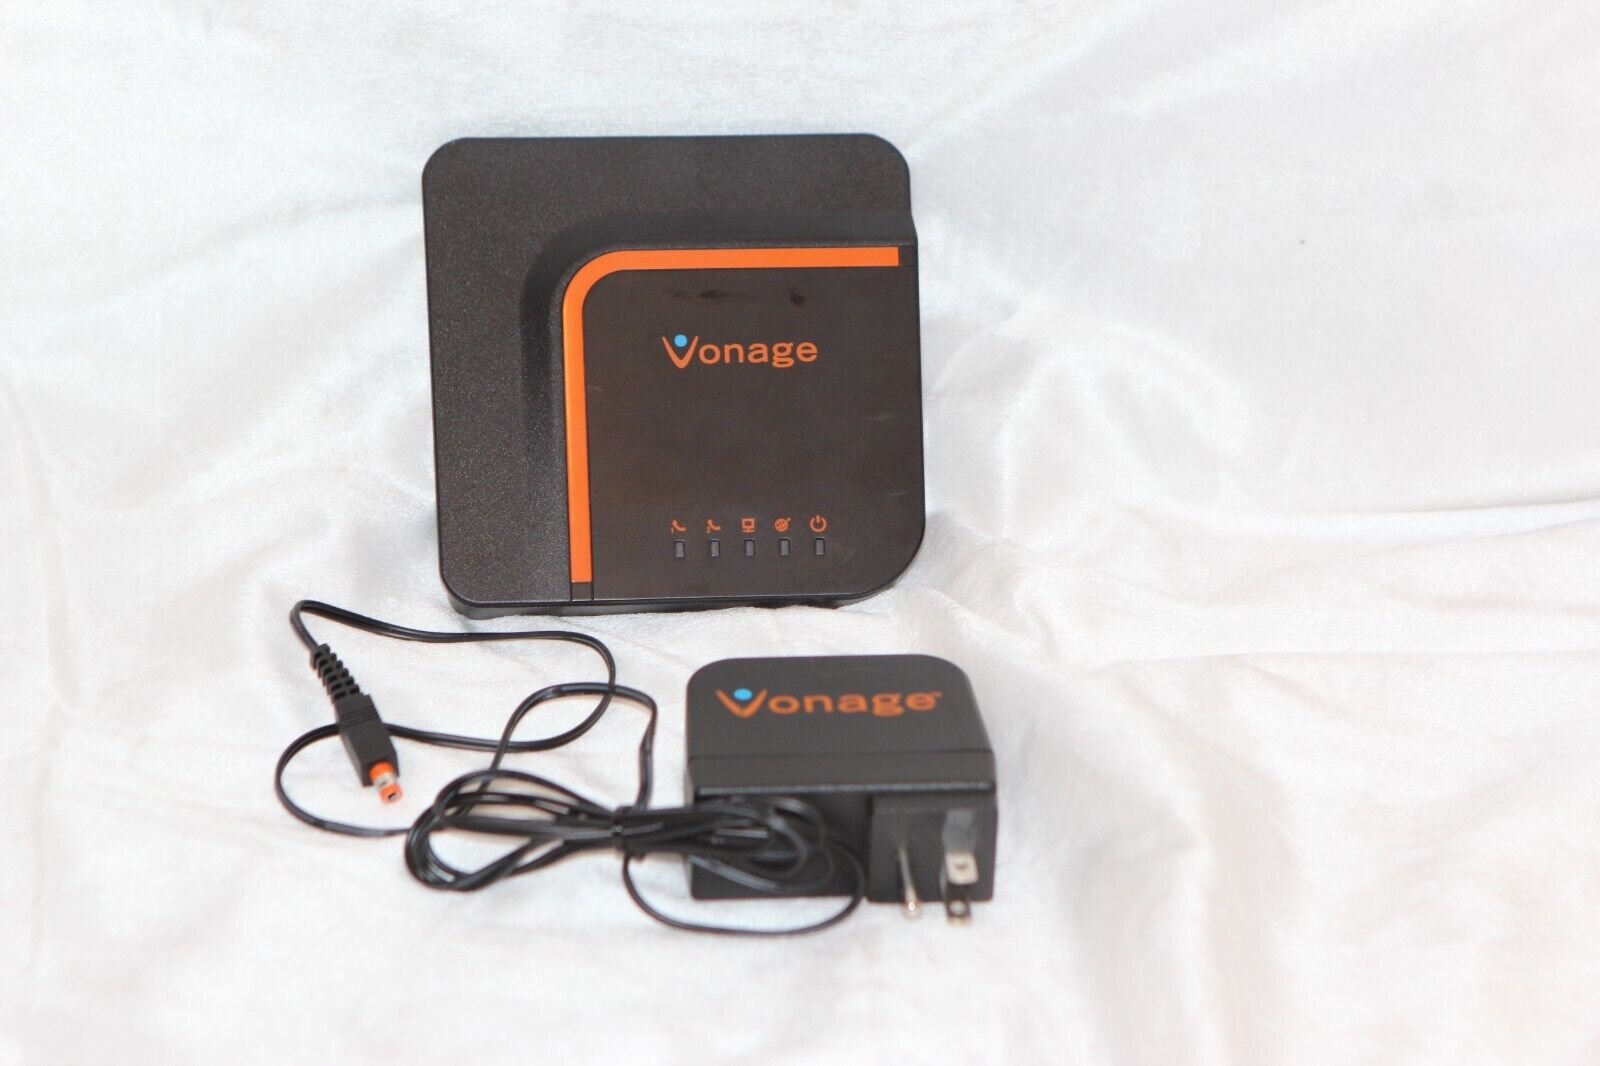 Vonage Digital Phone Service Adapter VOIP Router VDV23-VD with Power Cord